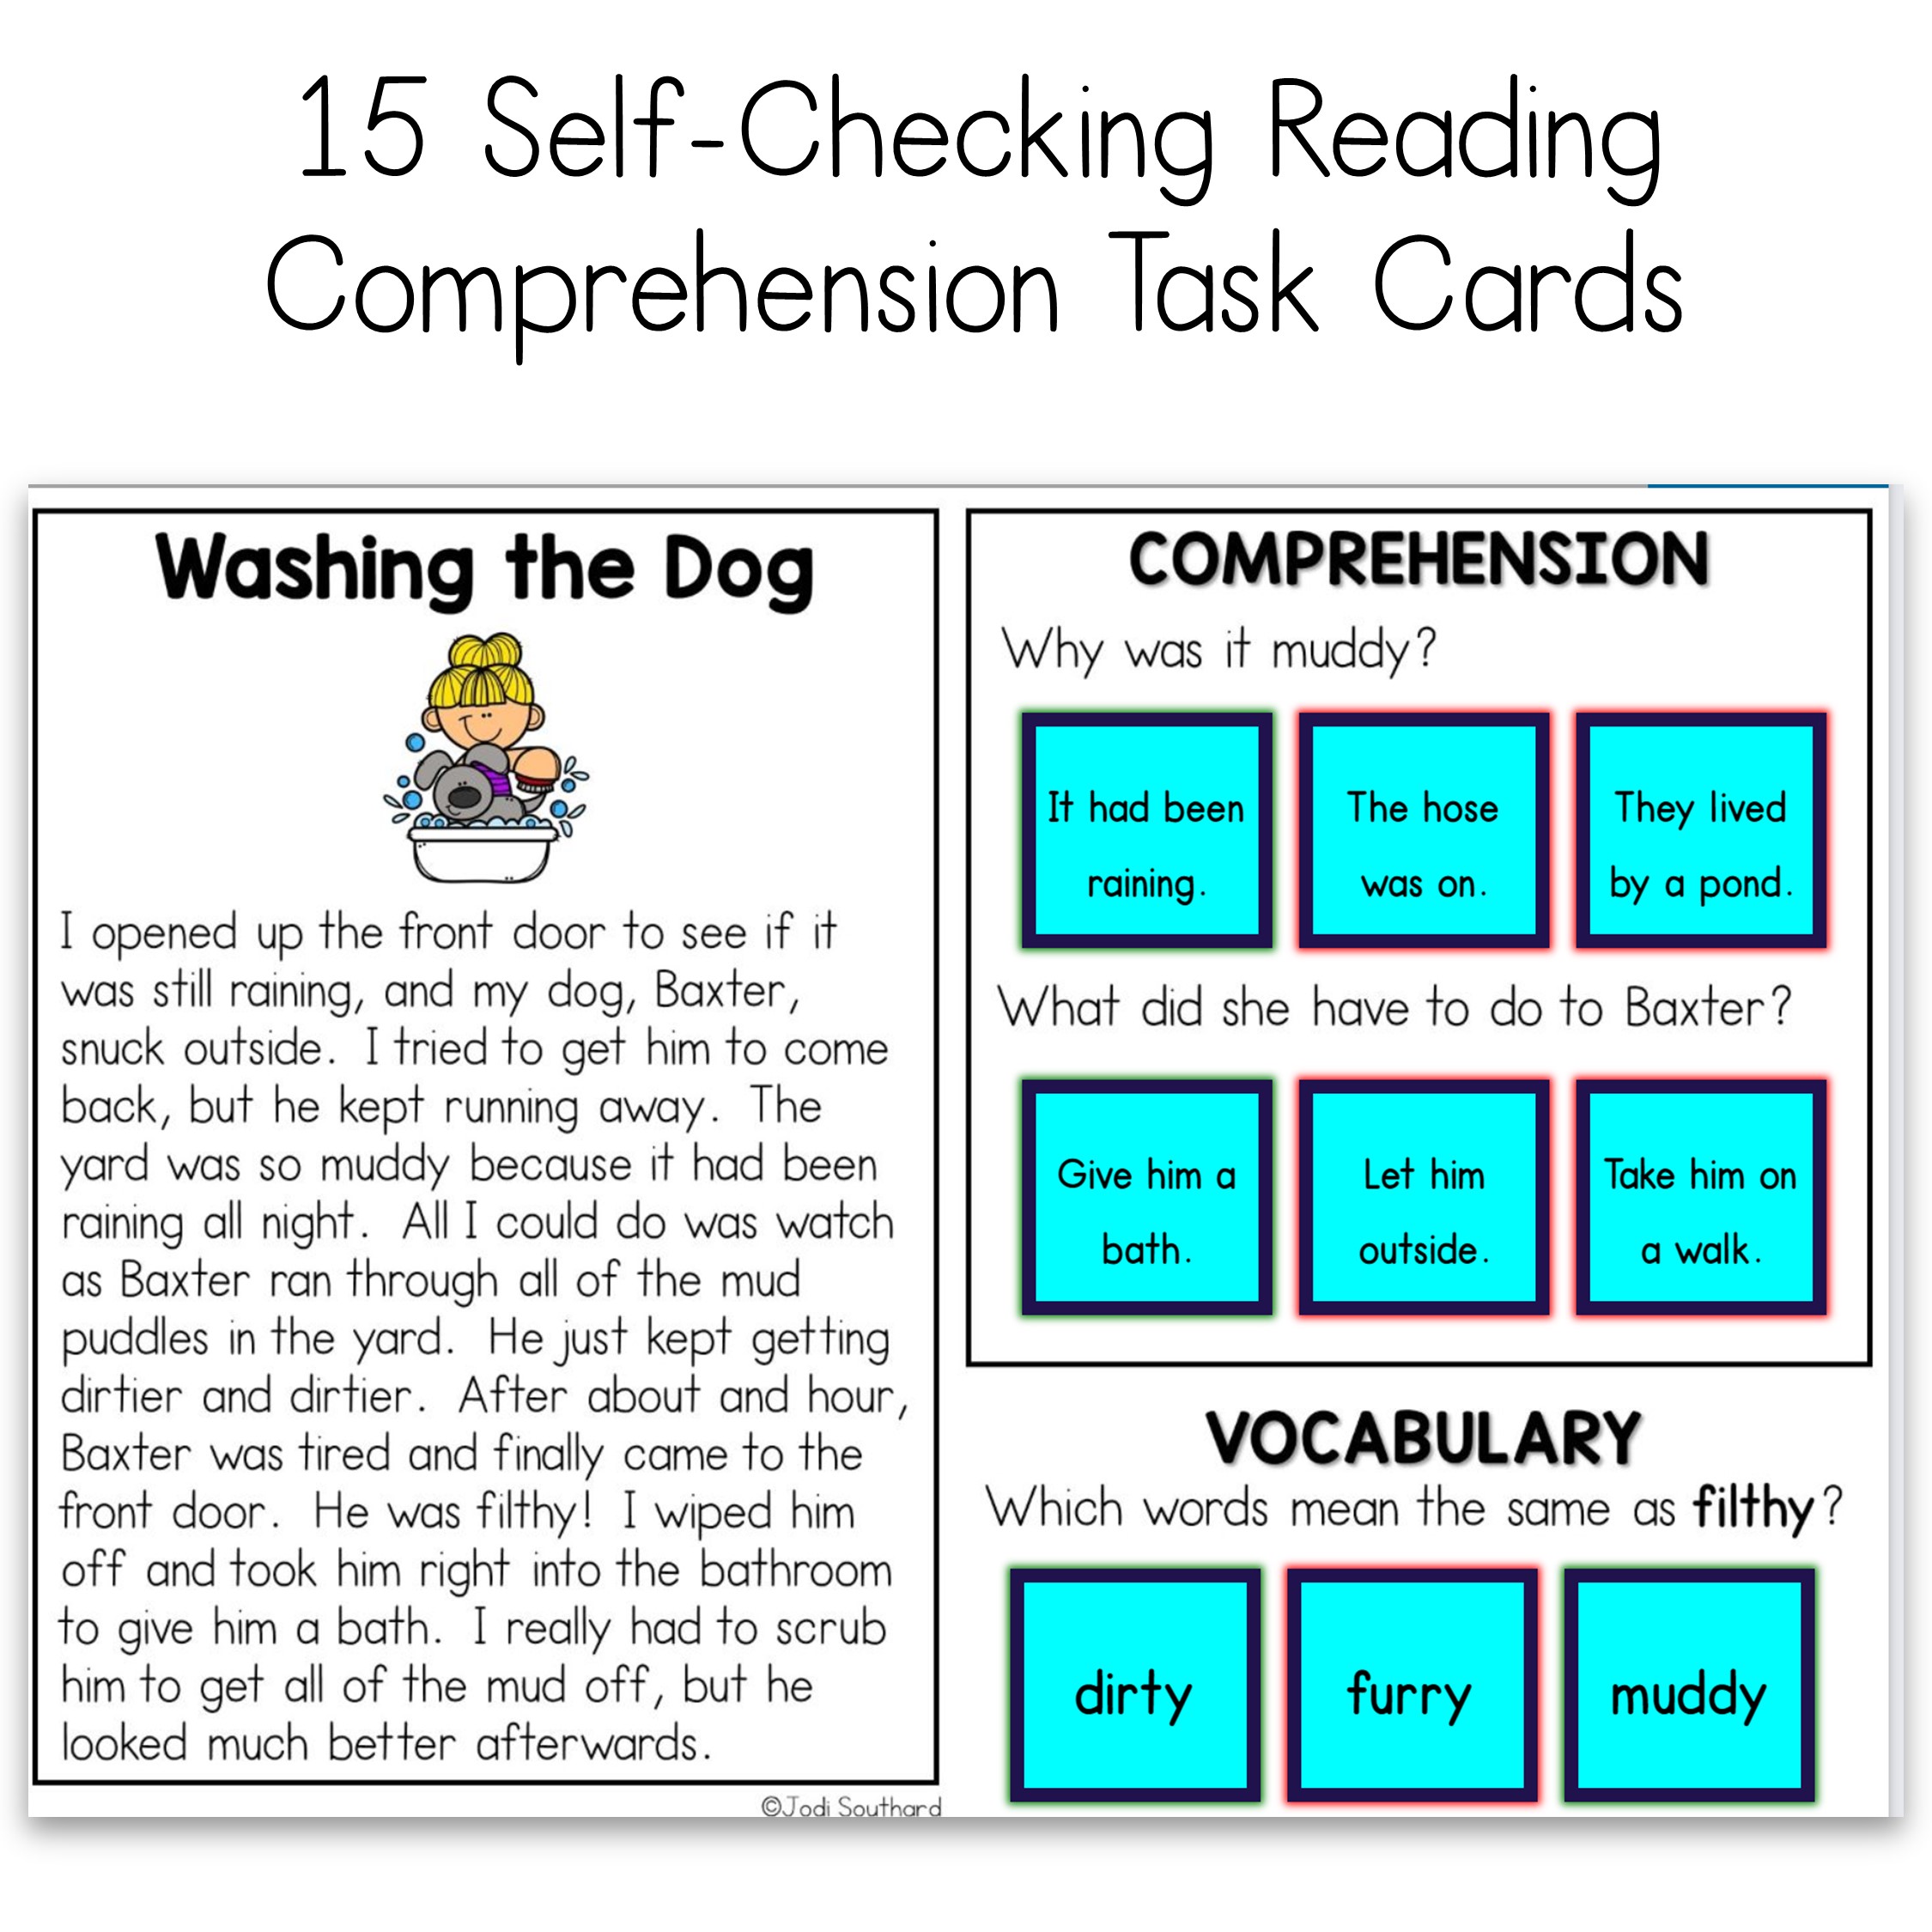 Self-Checking Reading Comprehension Cards